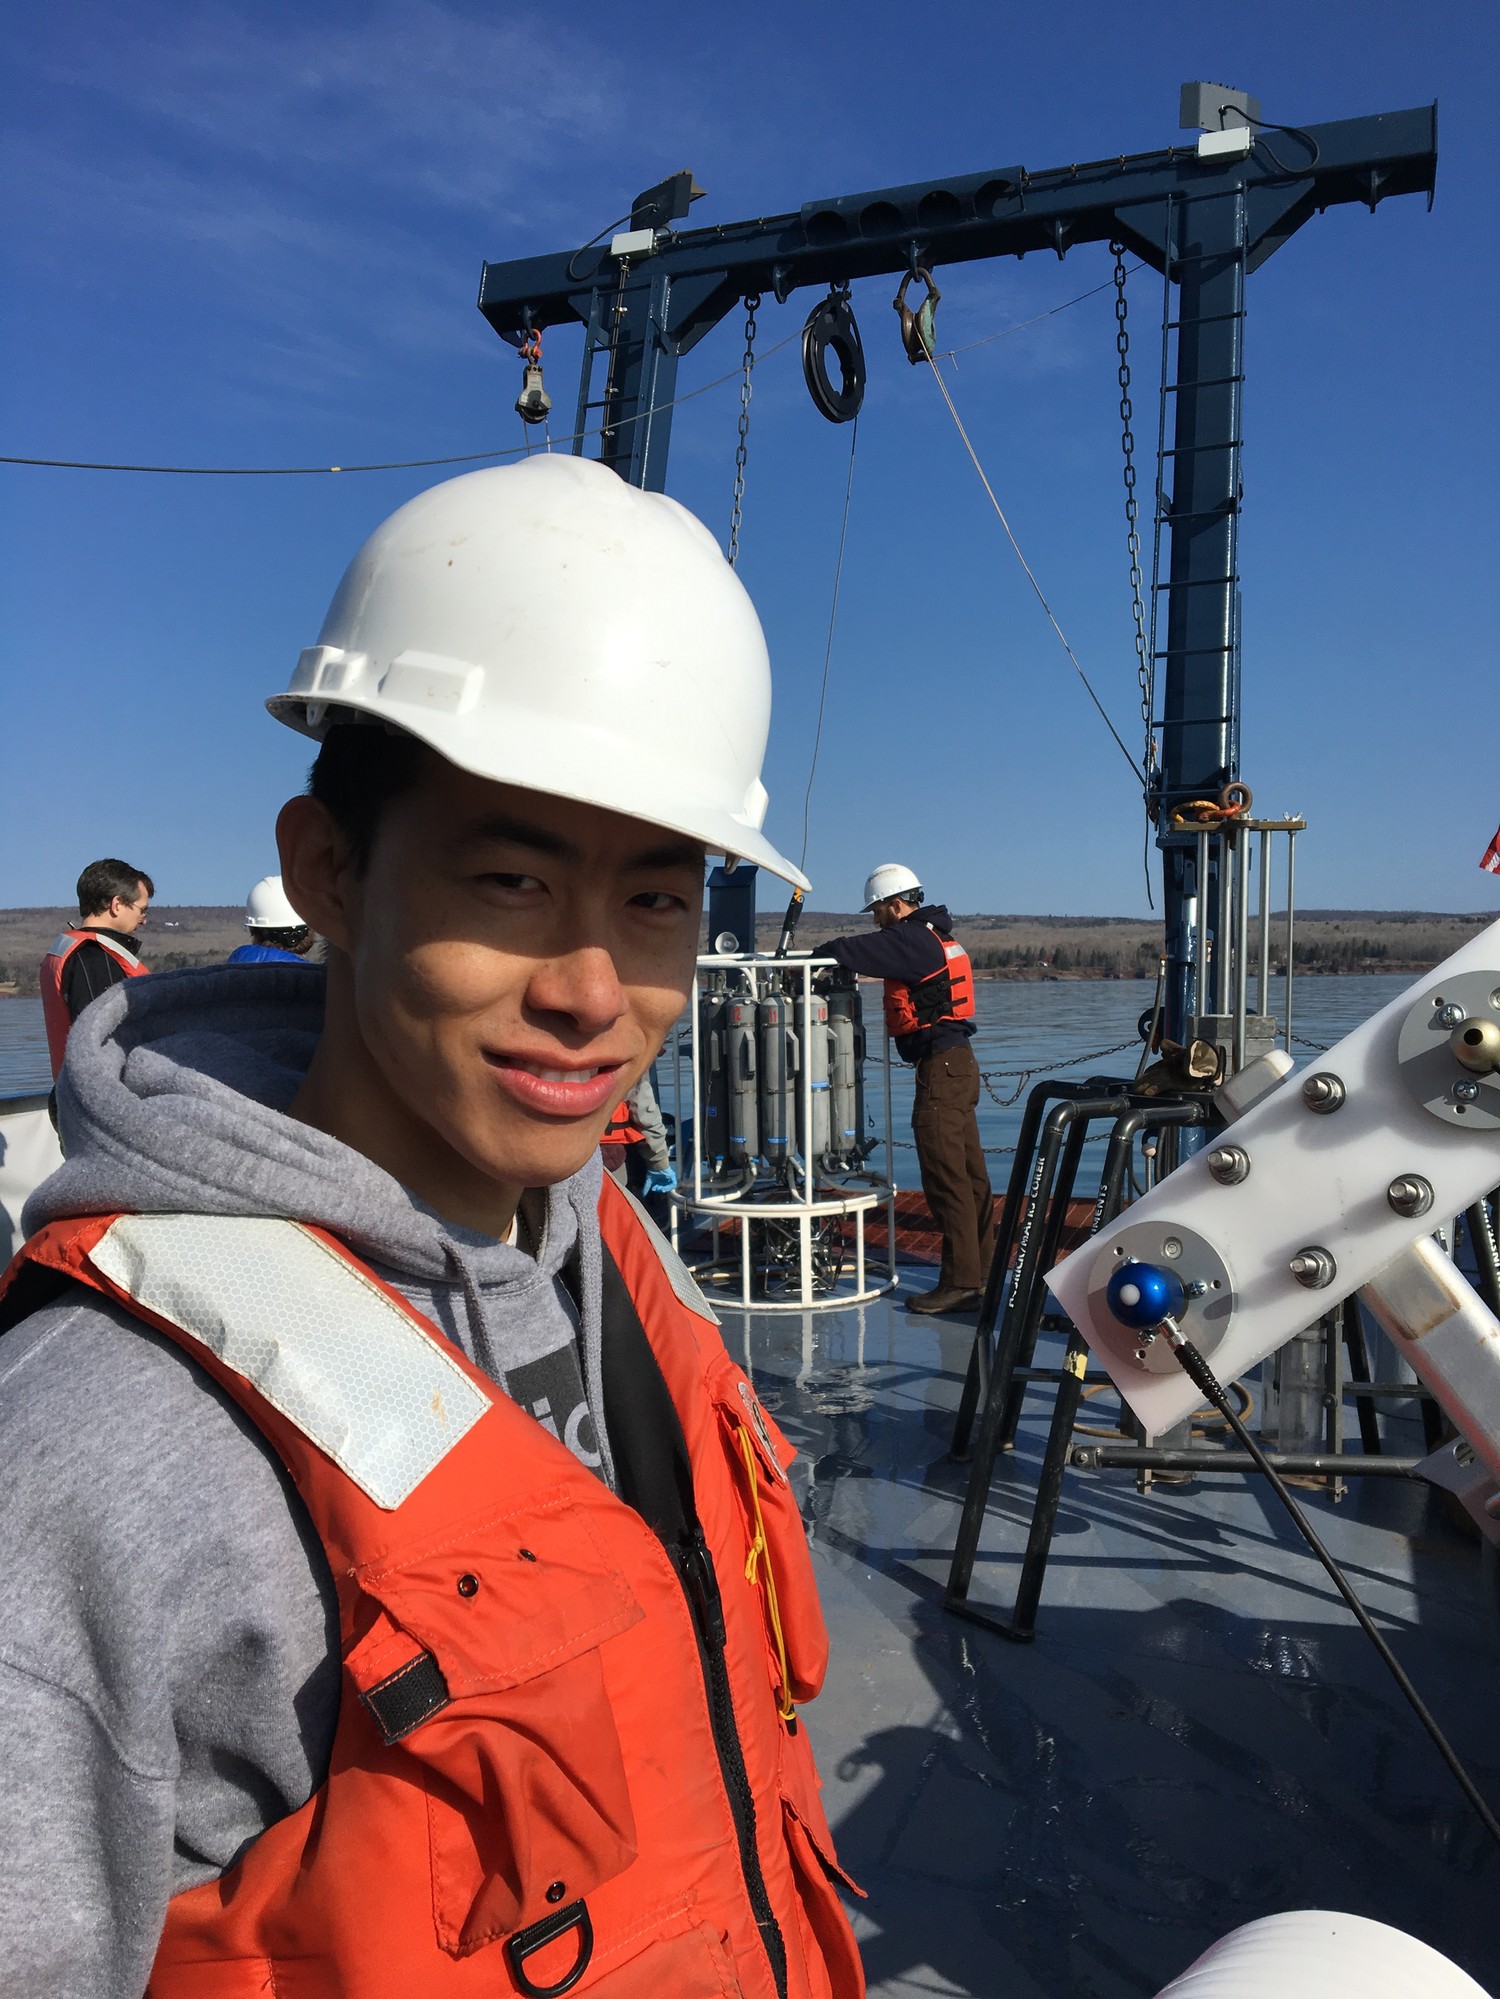 Taeho Lim on the Blue Heron research vessel